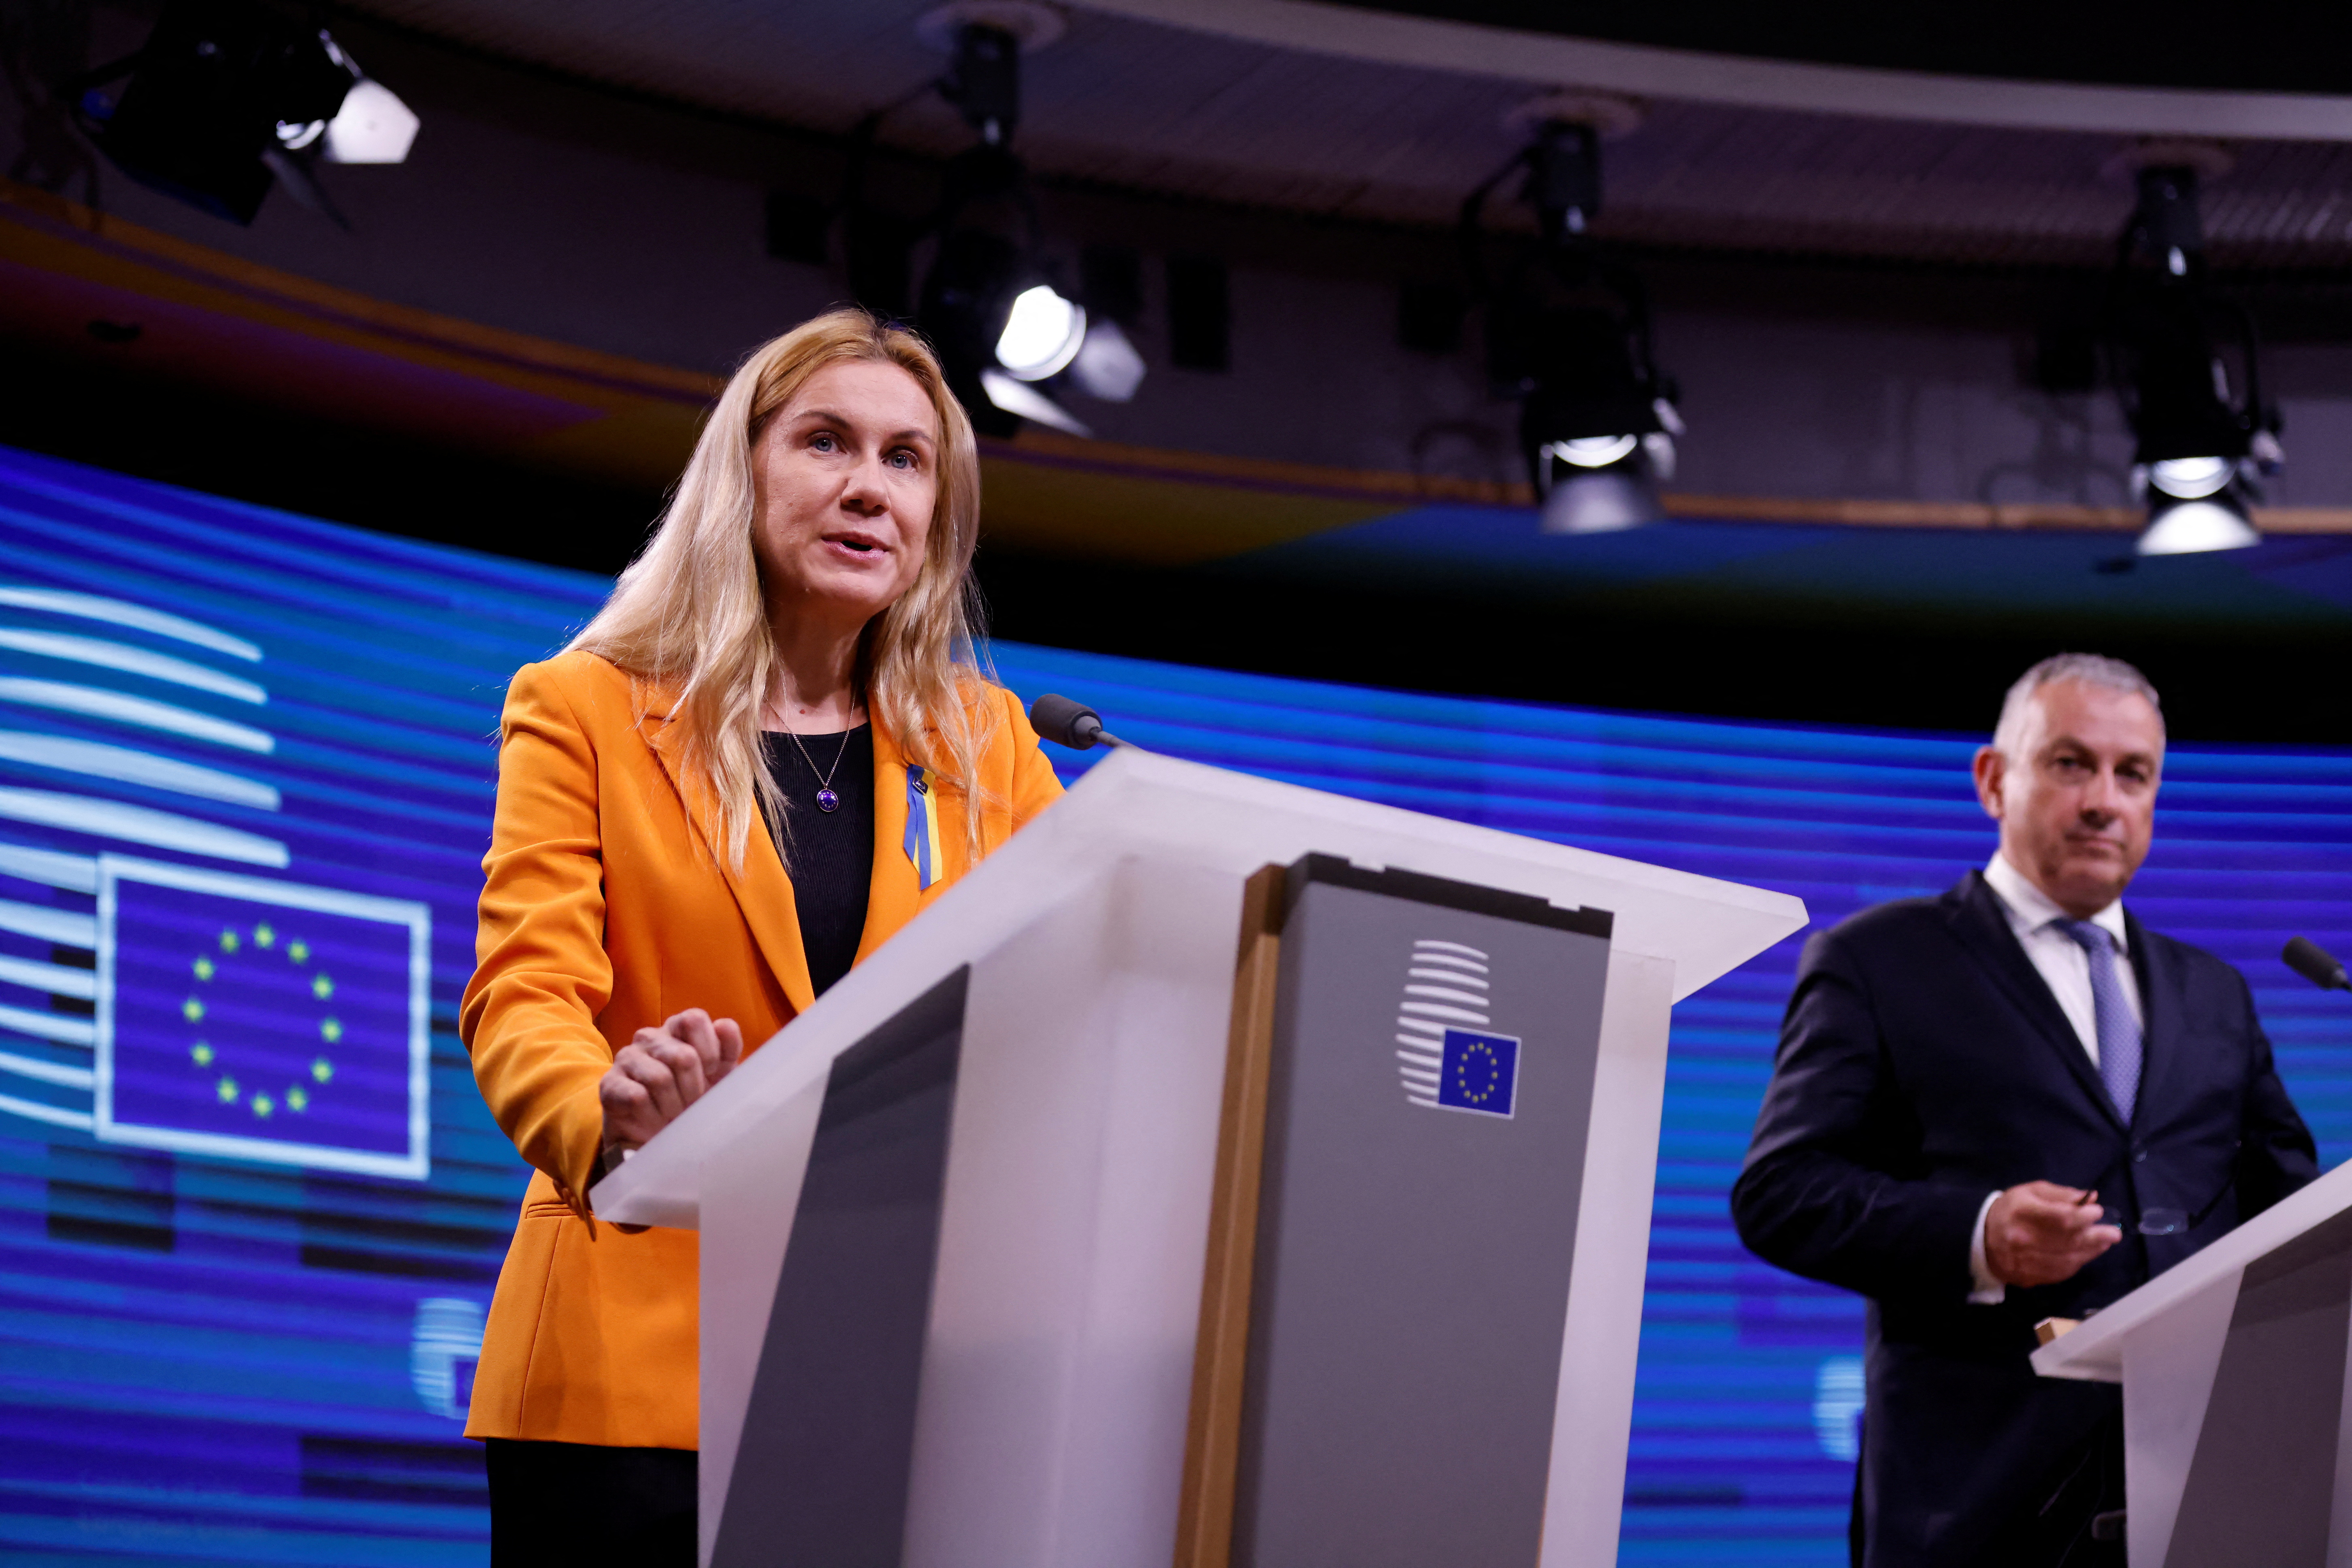 News conference on energy, in Brussels